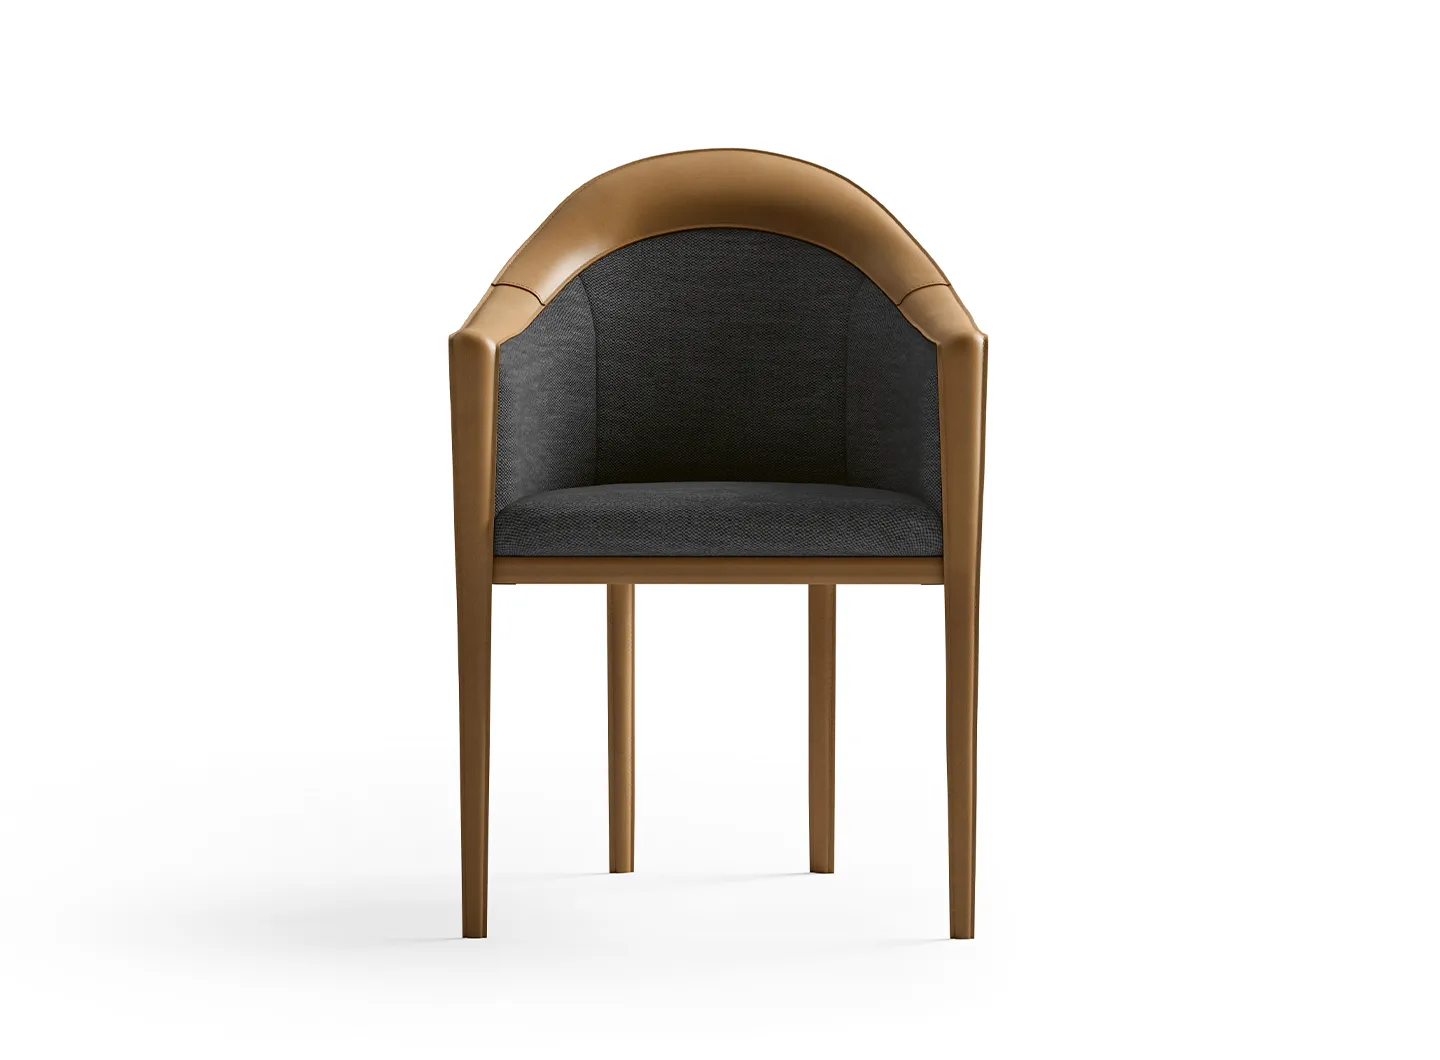 CPRN Homood-Chair with saddle leather